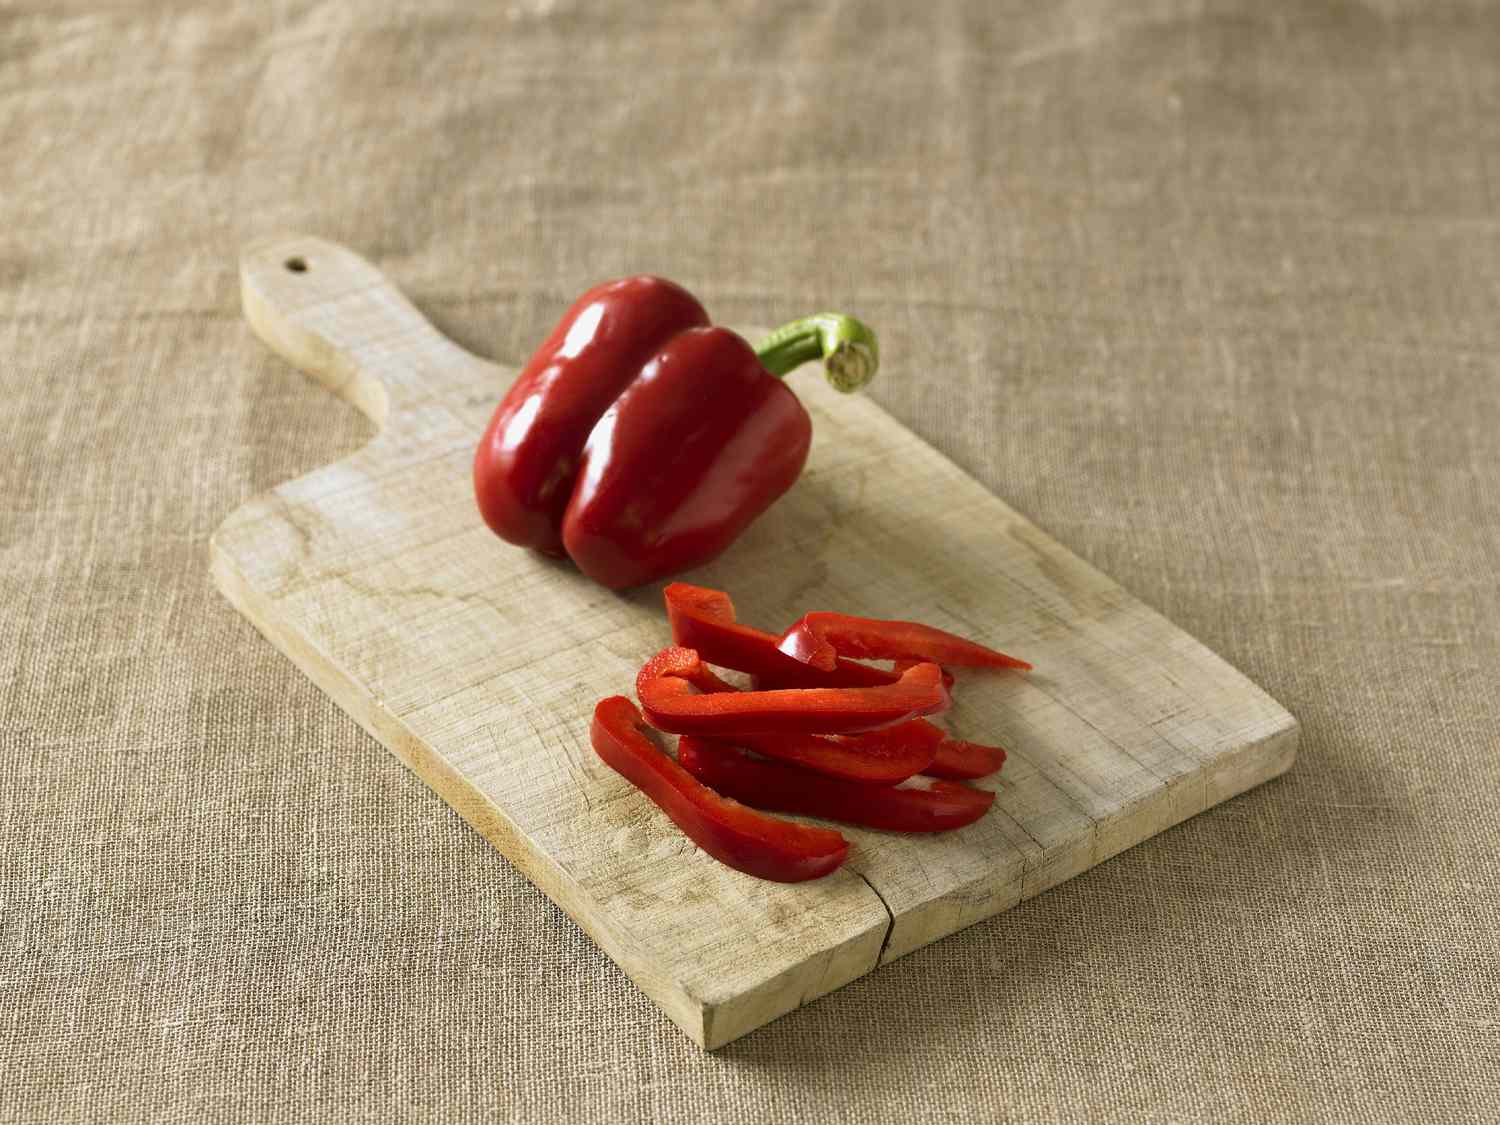 How To Store Cut Red Peppers